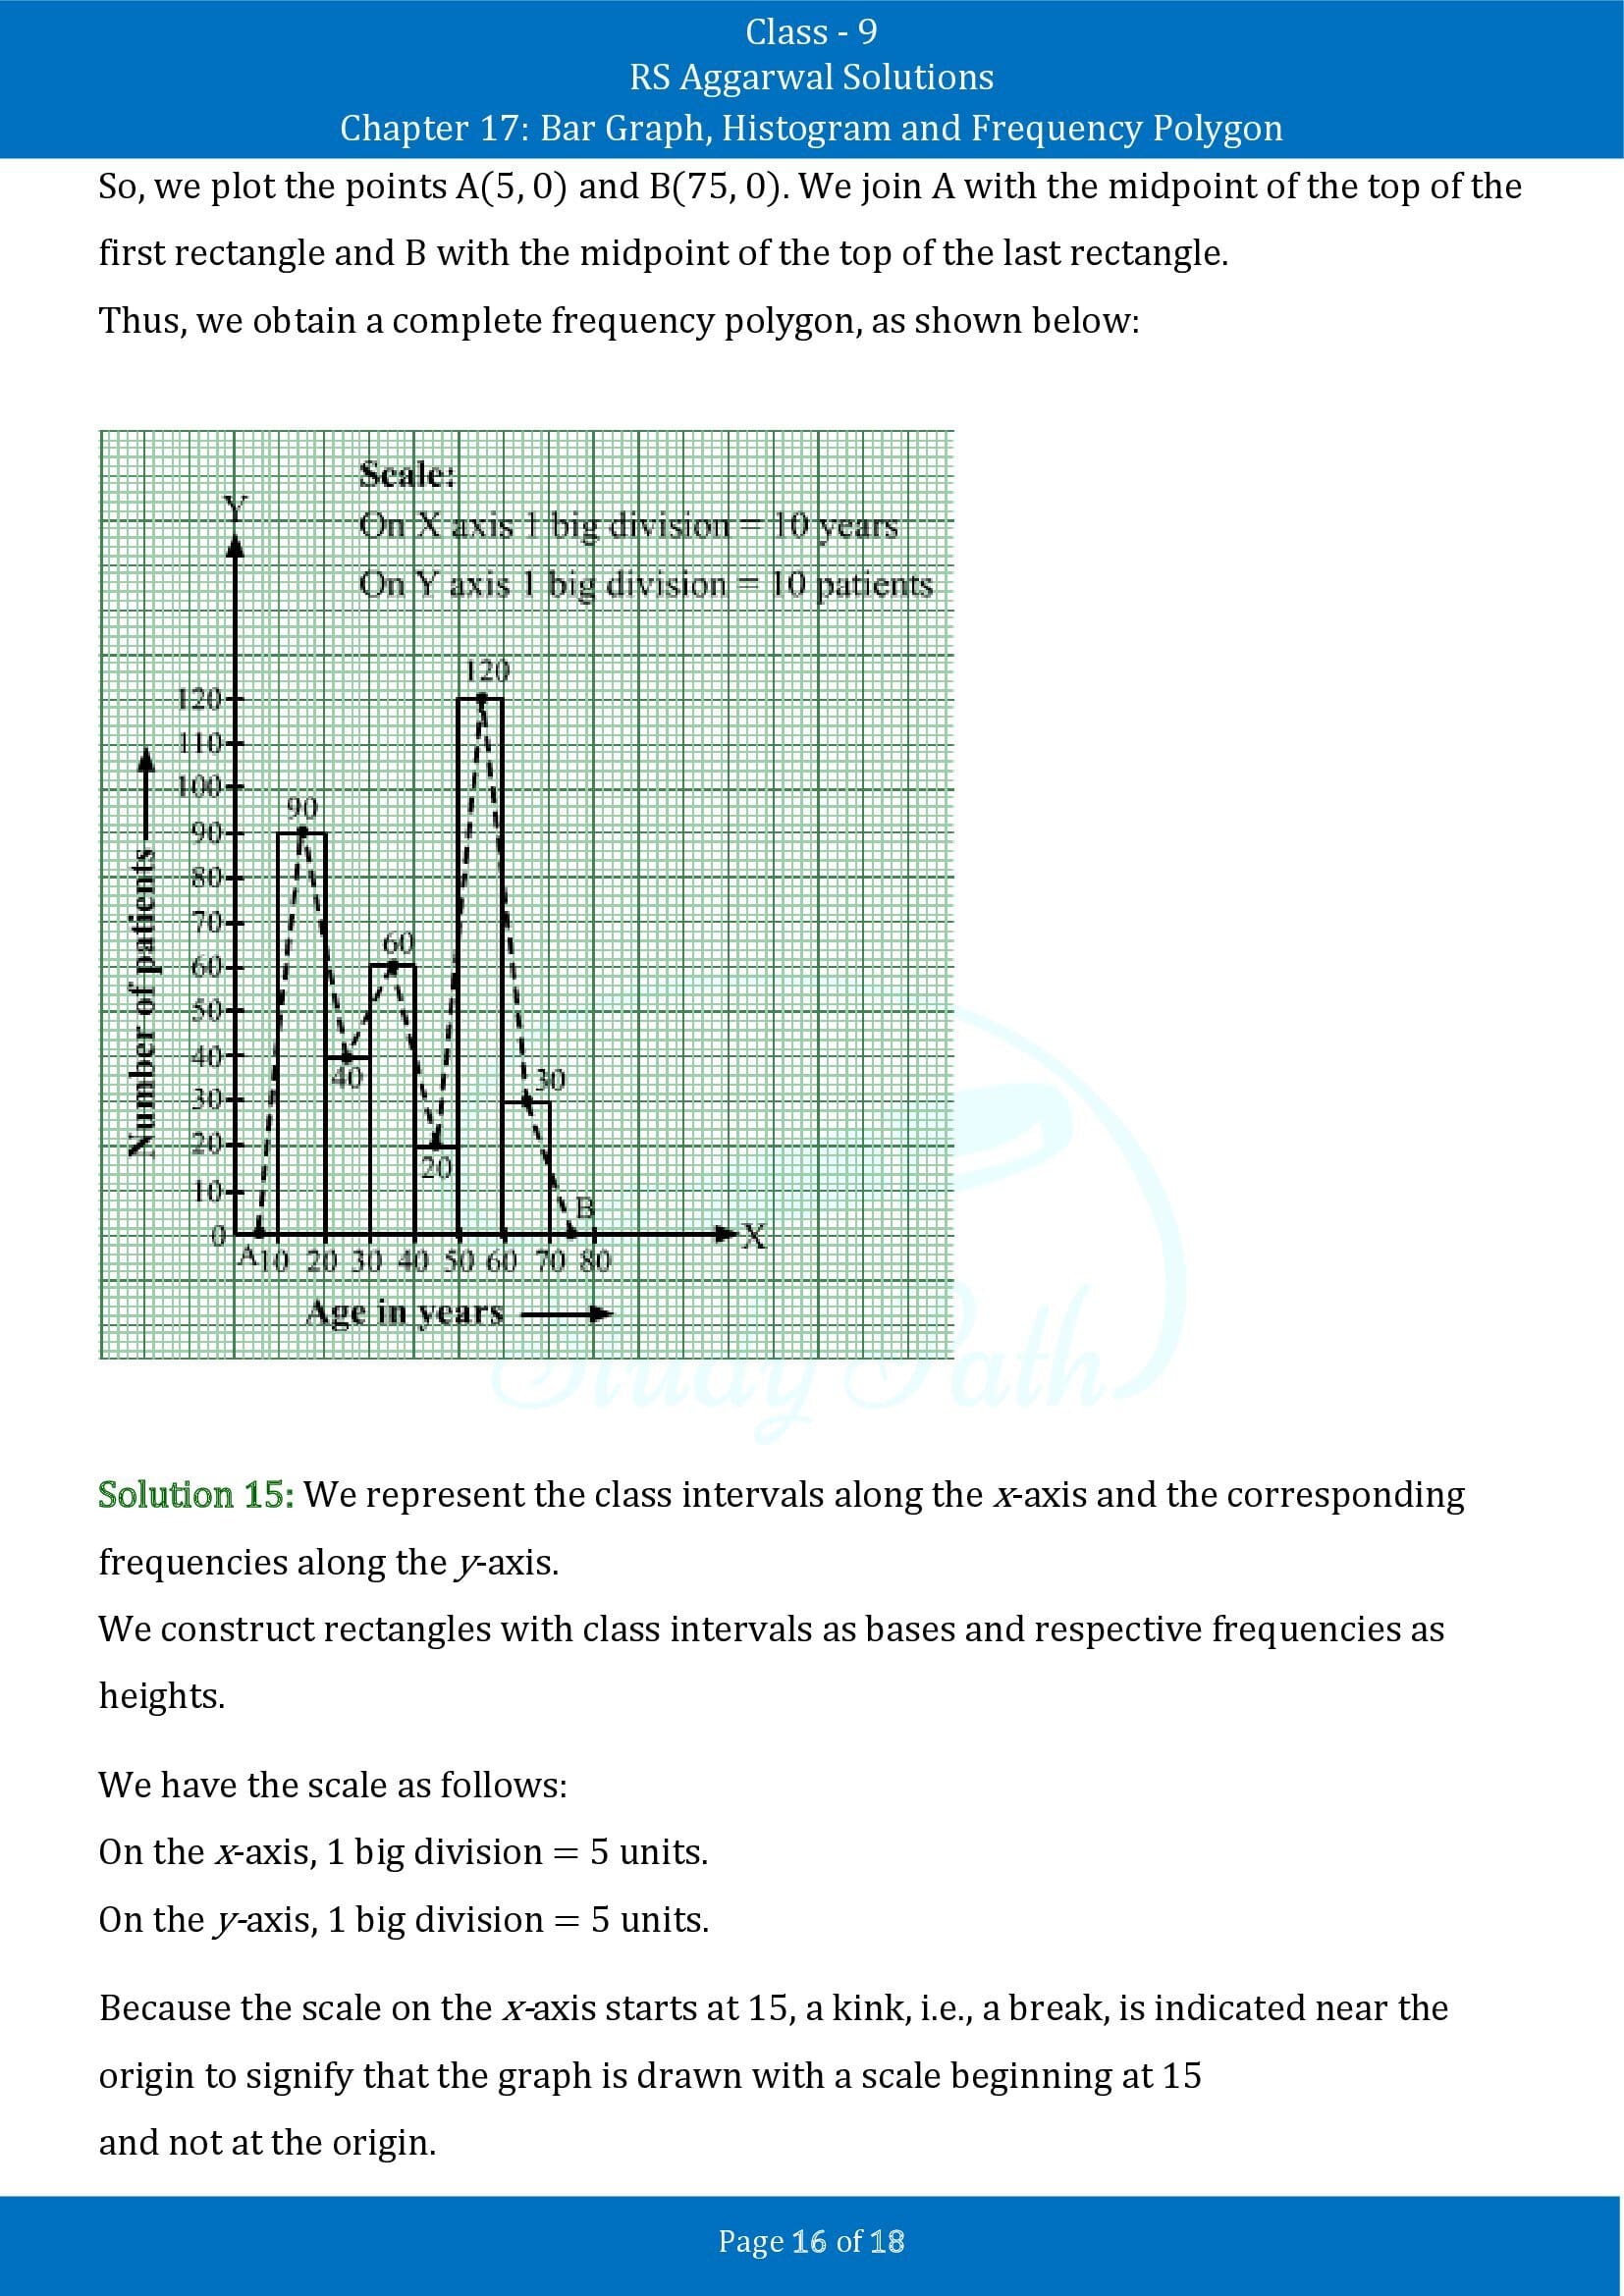 RS Aggarwal Solutions Class 9 Chapter 17 Bar Graph Histogram and Frequency Polygon Exercise 17B 00016